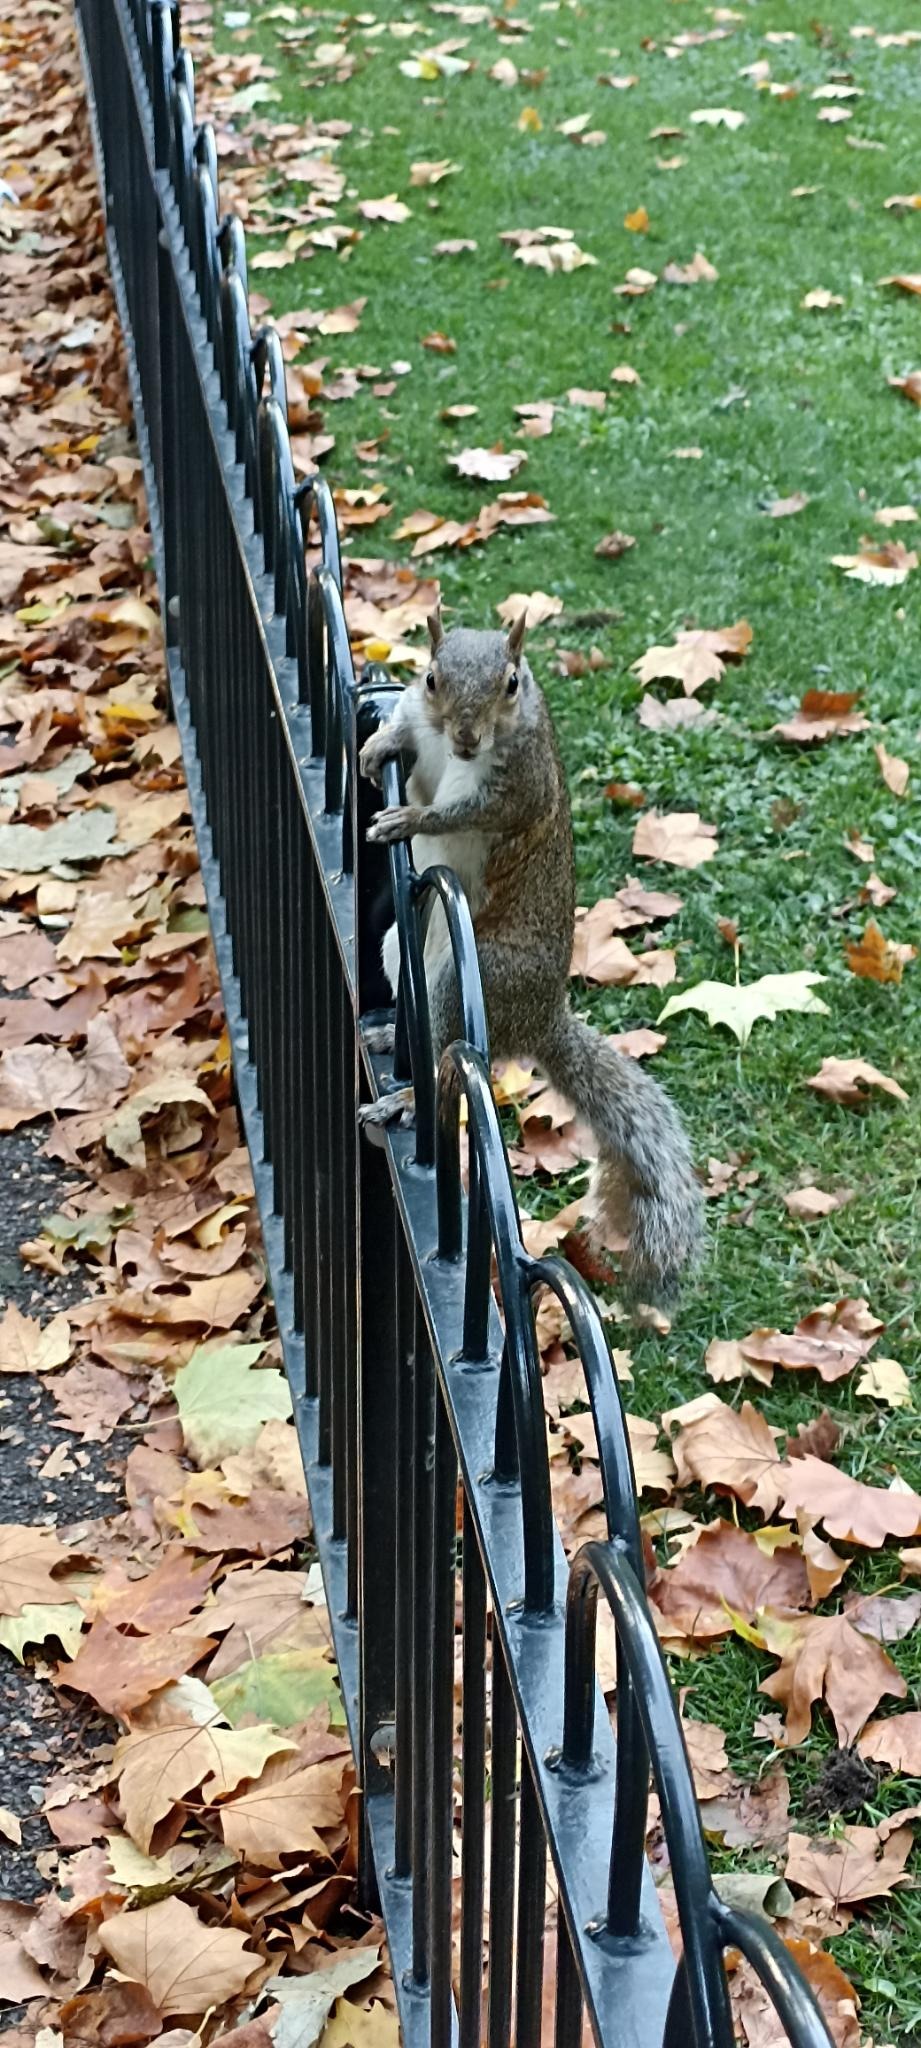 Picture of a squirrel.